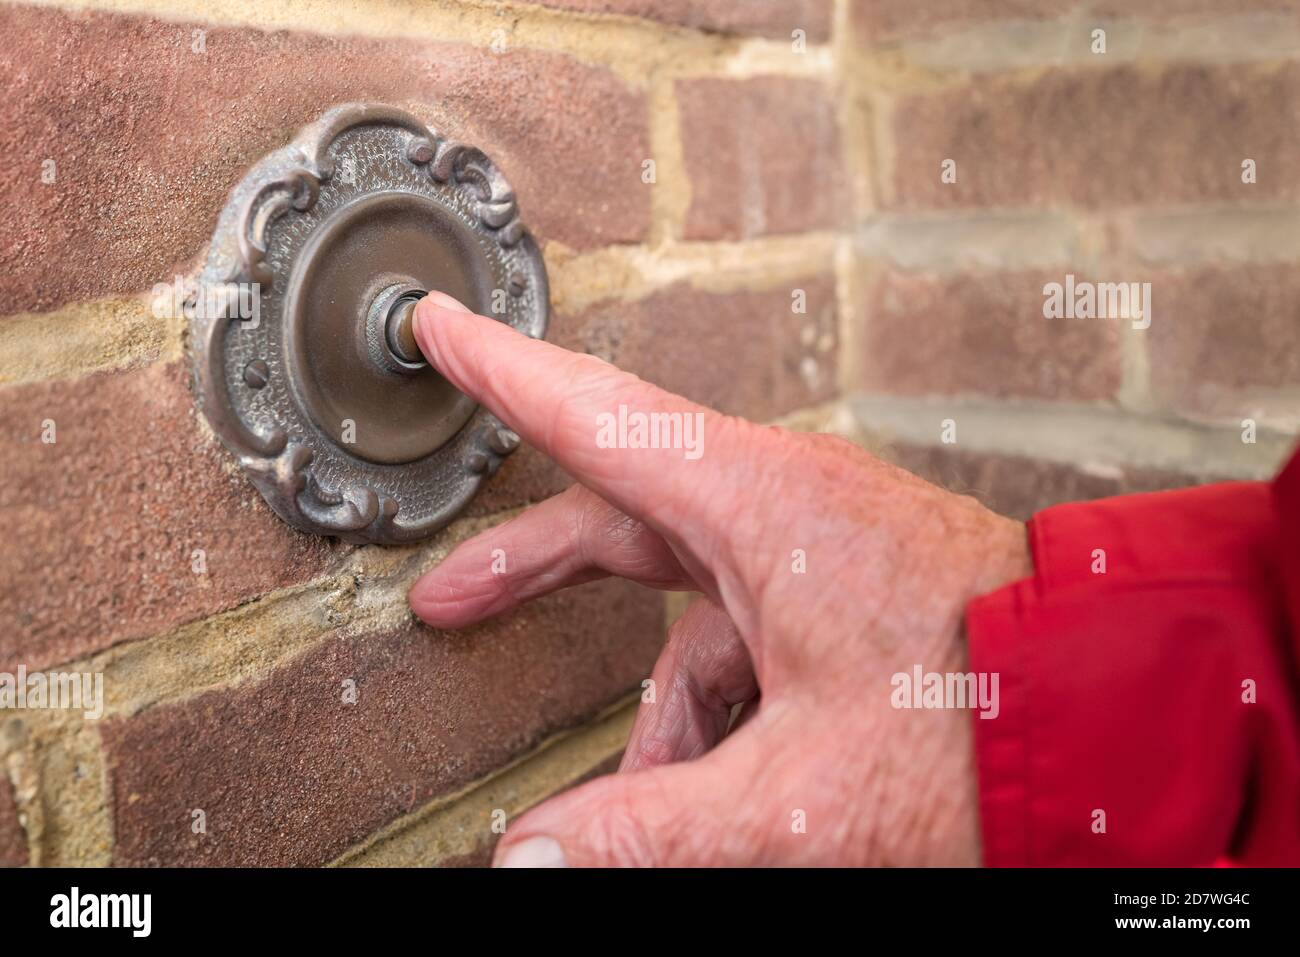 A vintage antique style metal door bell being pushed by a male hand iwith a red sleeve Stock Photo